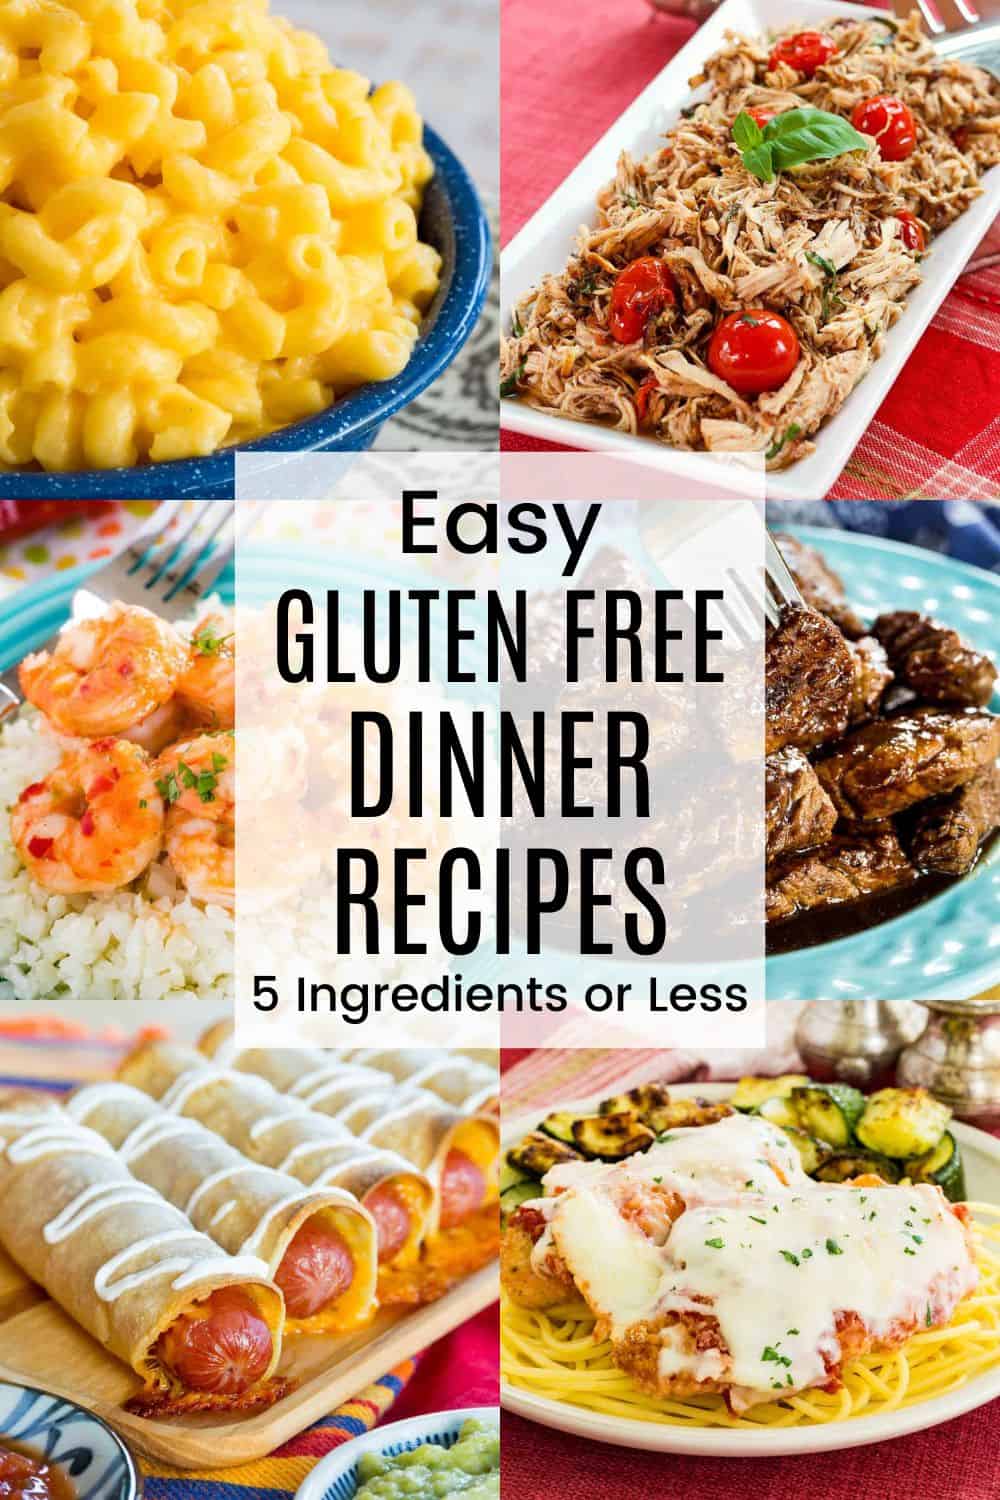 A two-by-three collage of dishes such as steak bites, shrimp served over cauliflower rice, chicken parmesan with spaghetti, and more with a white box in the middle with text overlay that says "Easy Gluten Free Dinner Recipes - 5 Ingredients or Less".